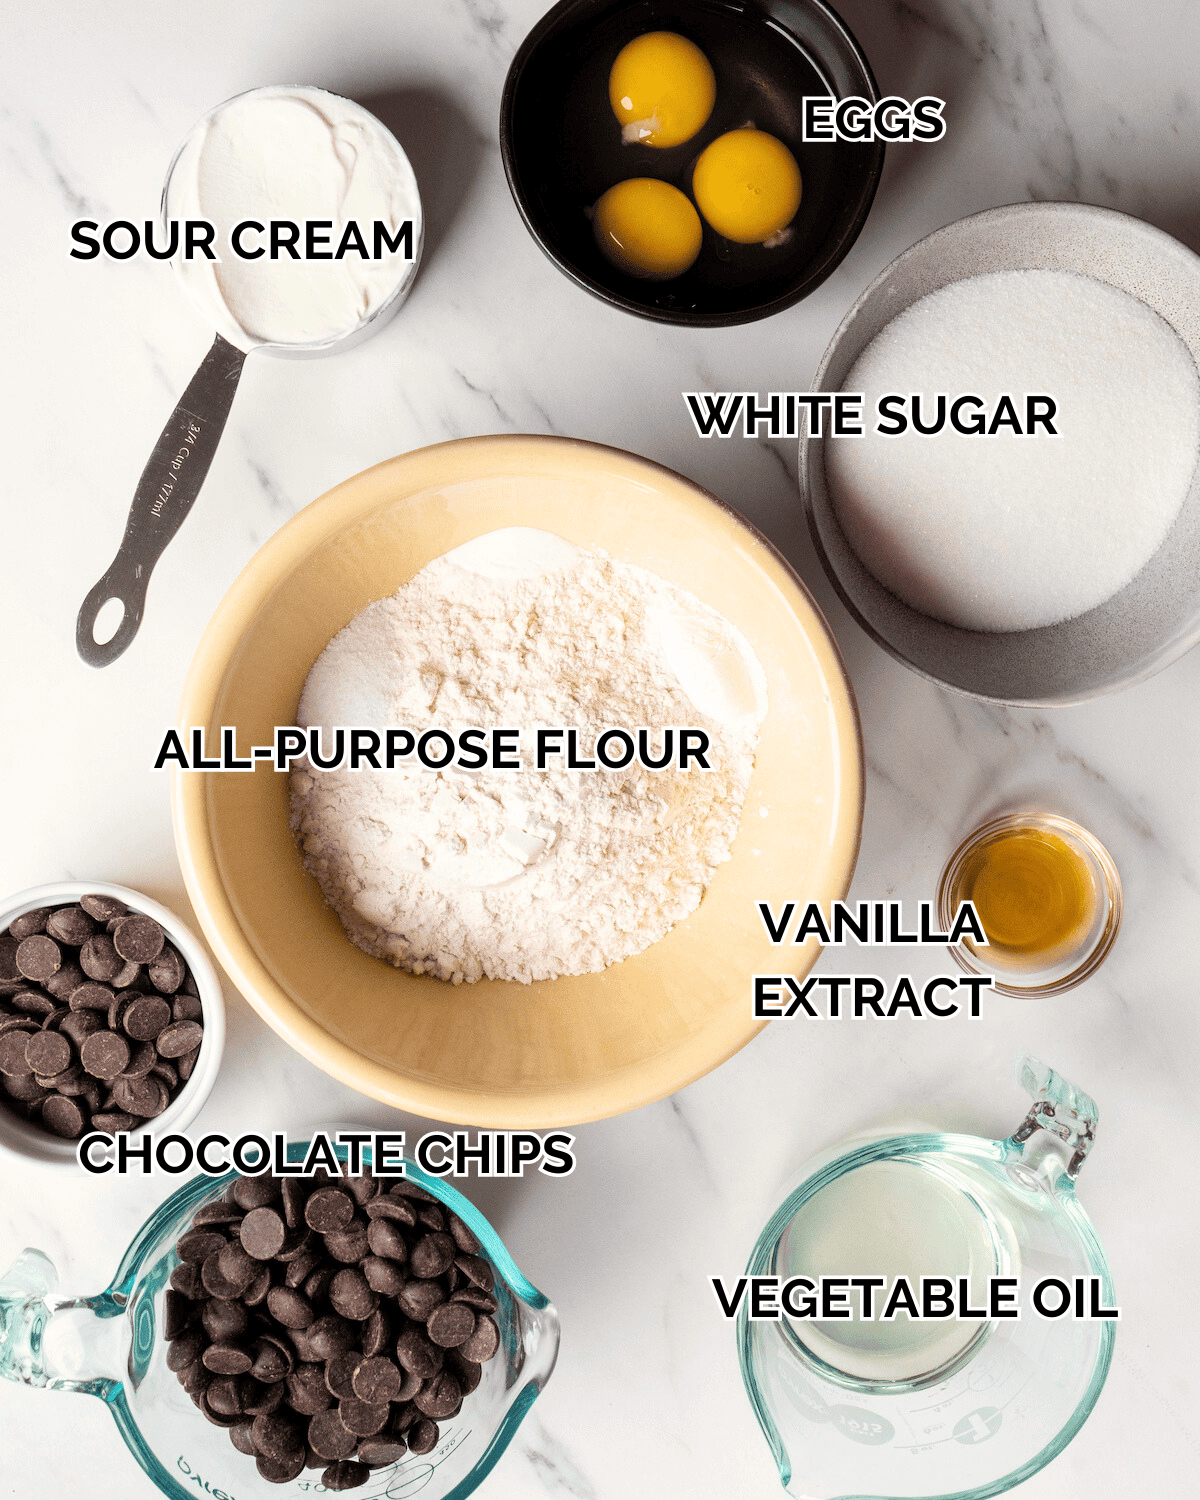 An overhead shot of all the individual ingredients in bowls.  Ingredients displayed in bowls are sour cream, eggs, white sugar, AP flour, chocolate chips, vanilla extract, and vegetable oil.  